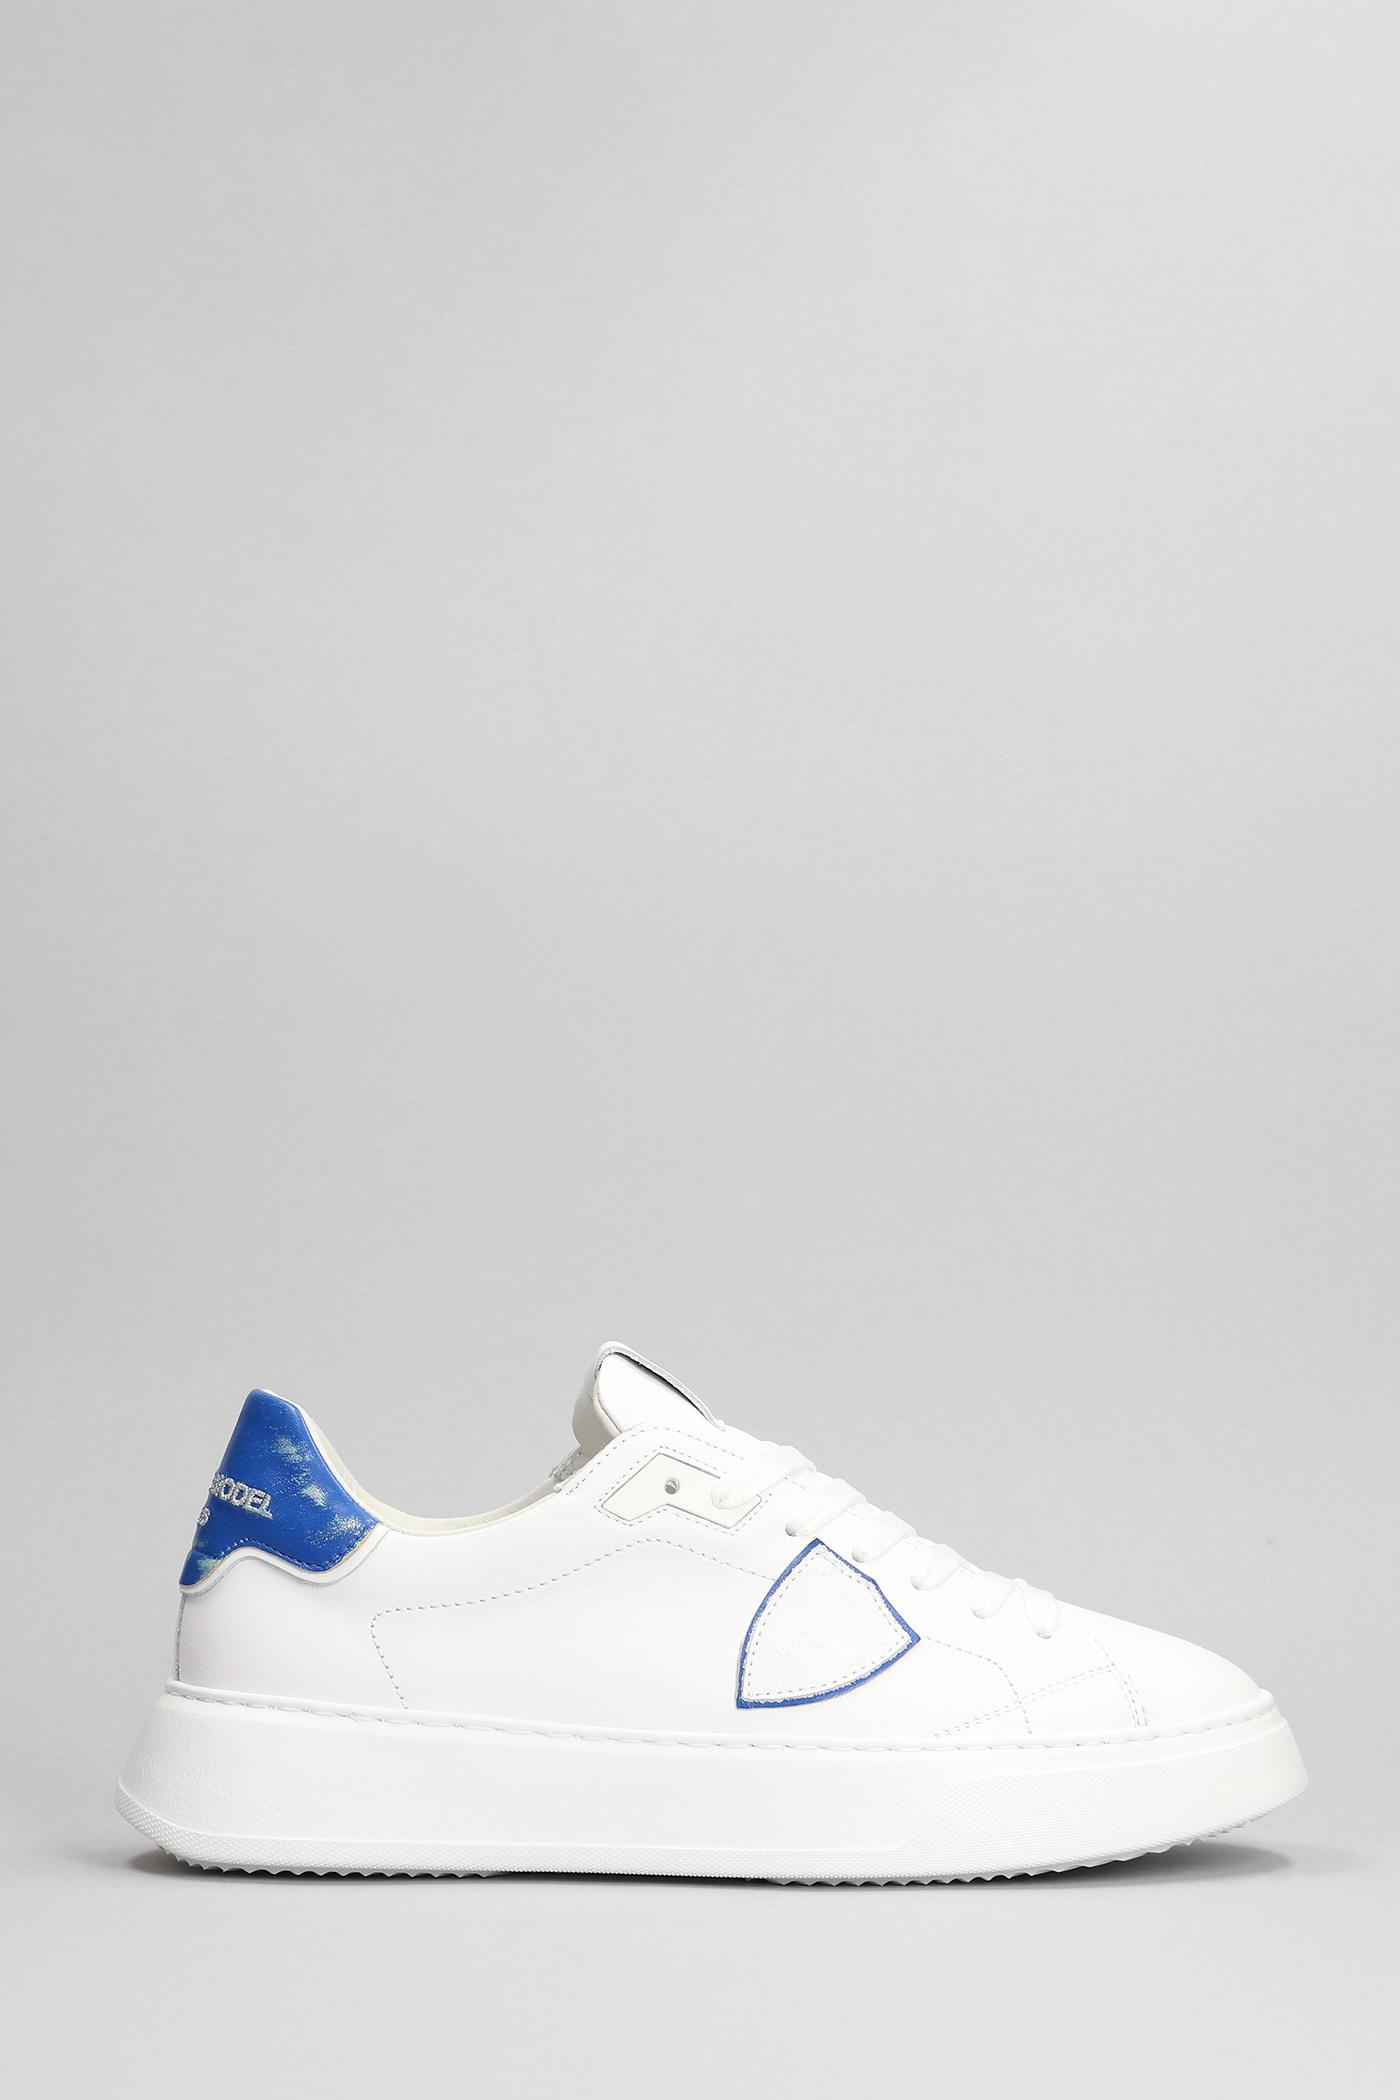 Philippe Model Temple Sneakers In White Leather for Men | Lyst